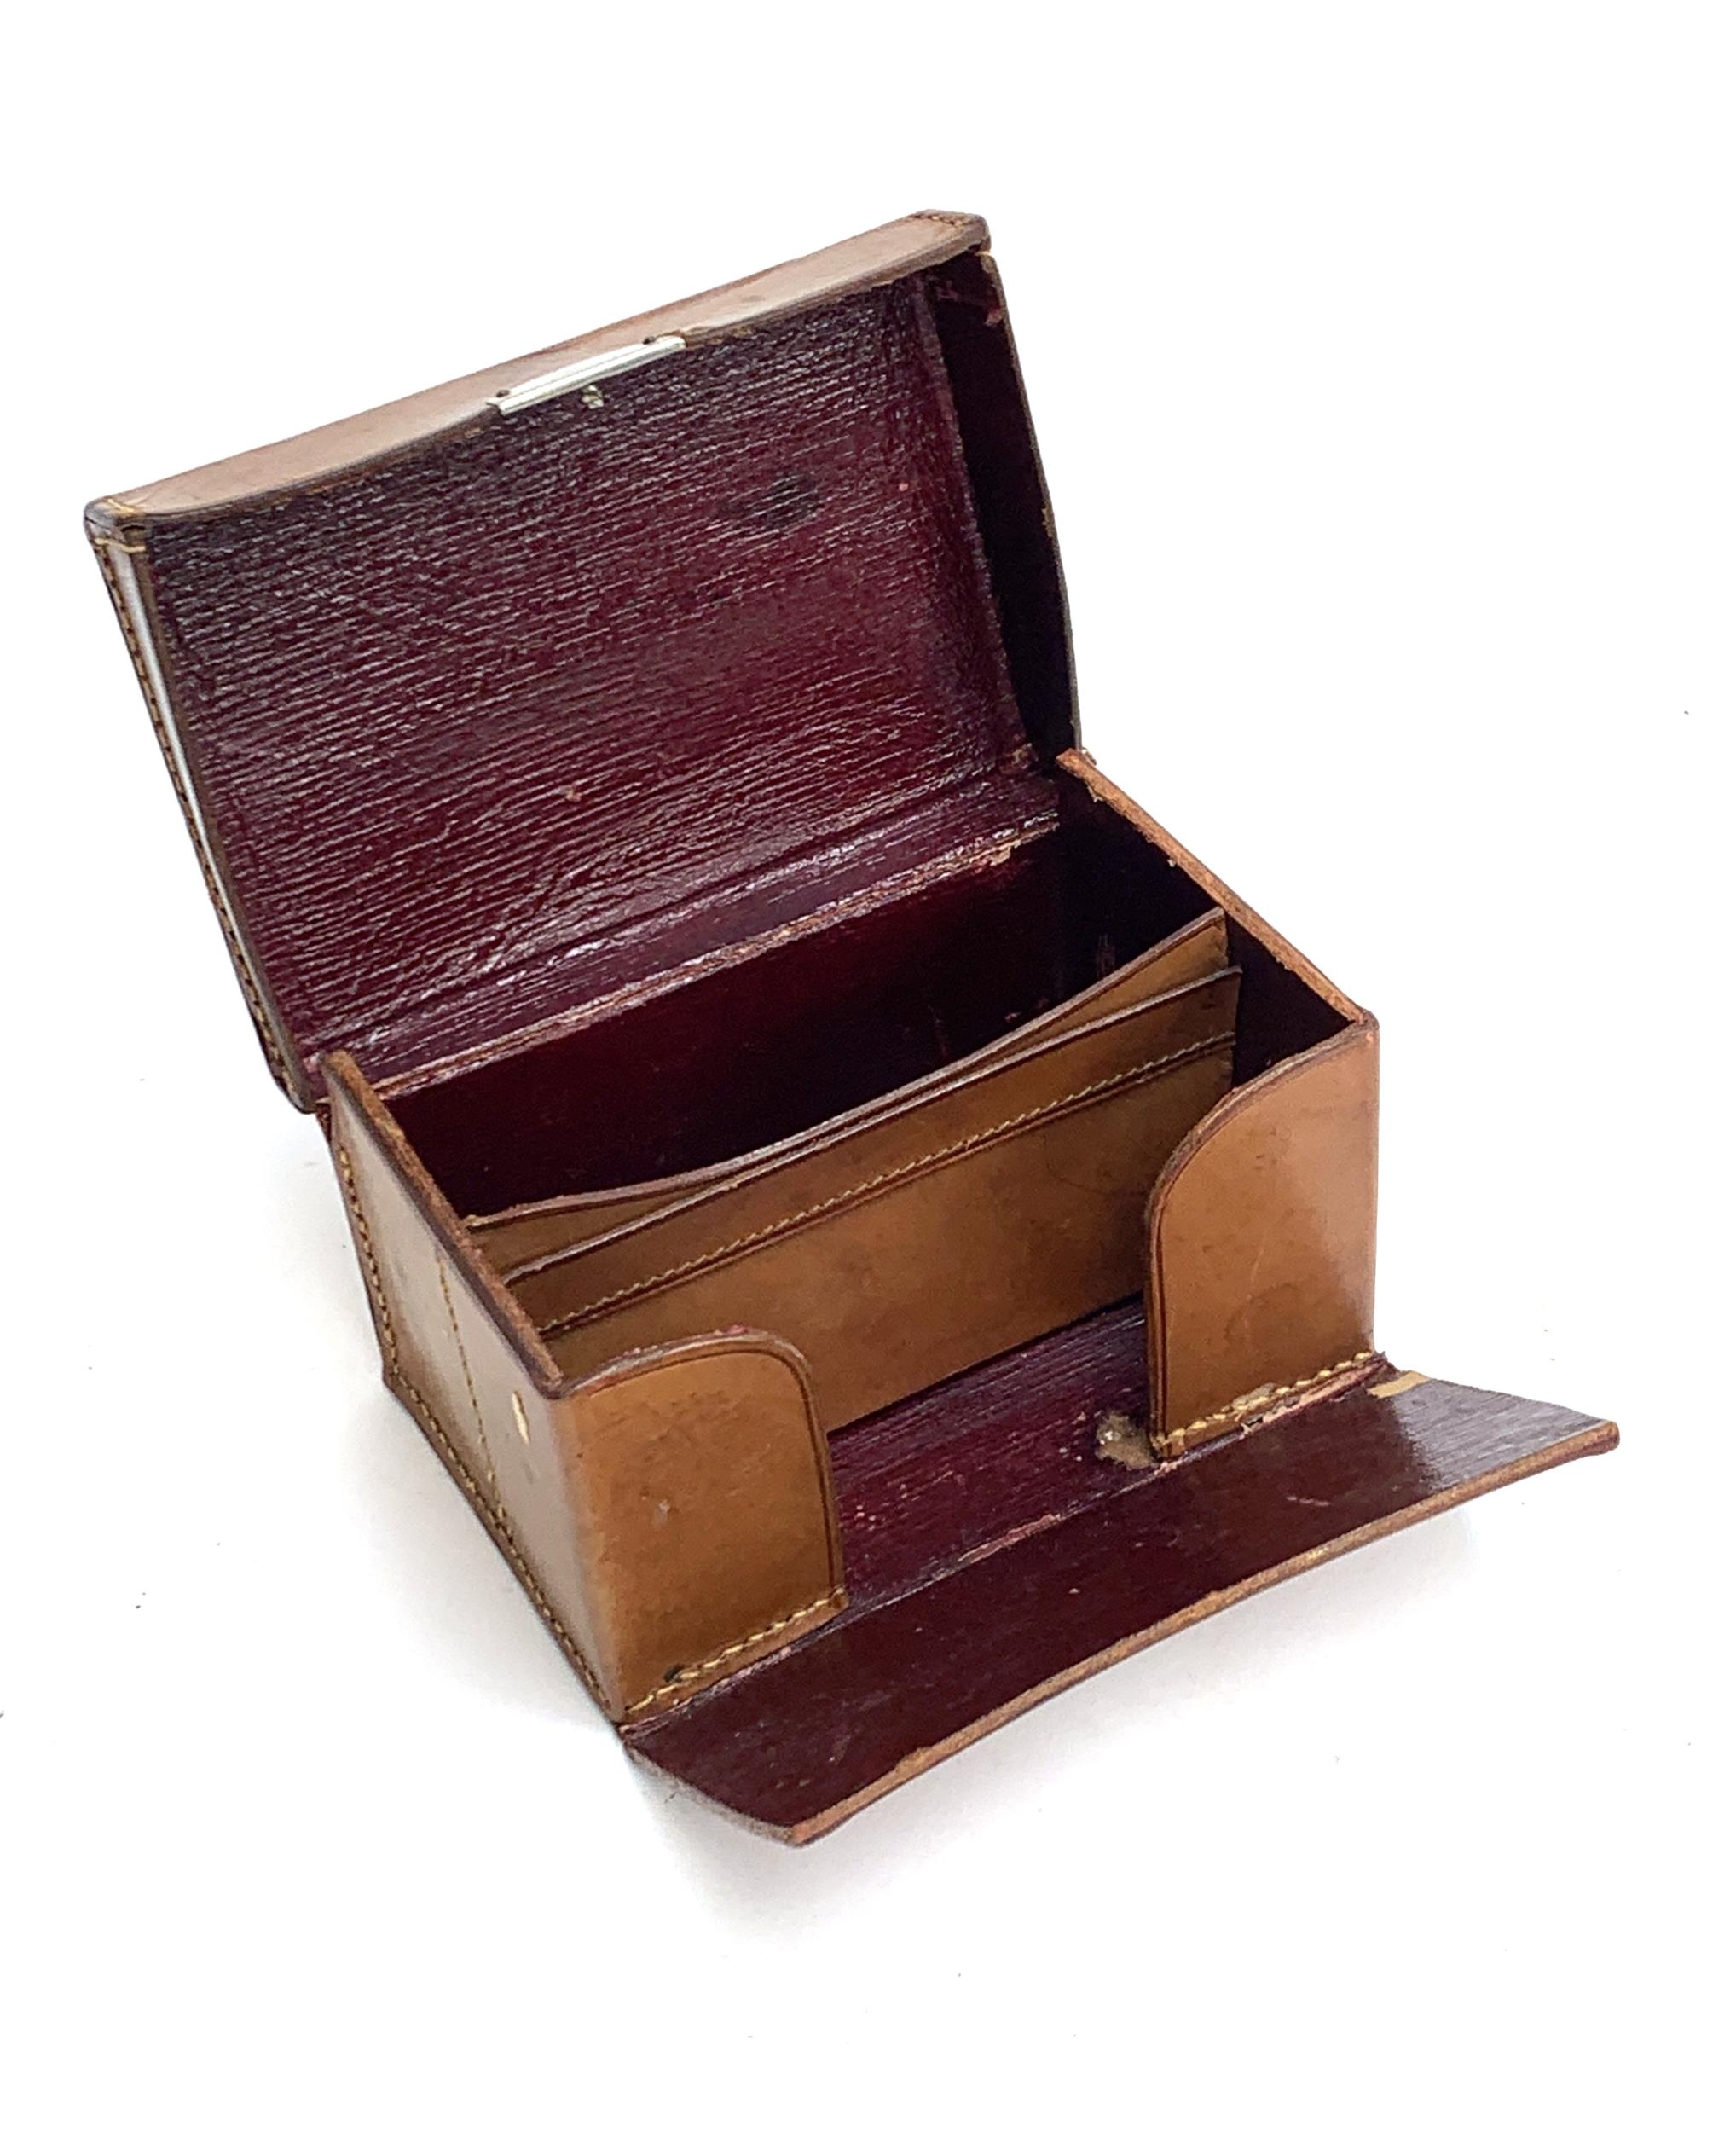 A gents leather stud or vanity box, with burgundy interior, 15x10x7.5cmH - Image 2 of 2